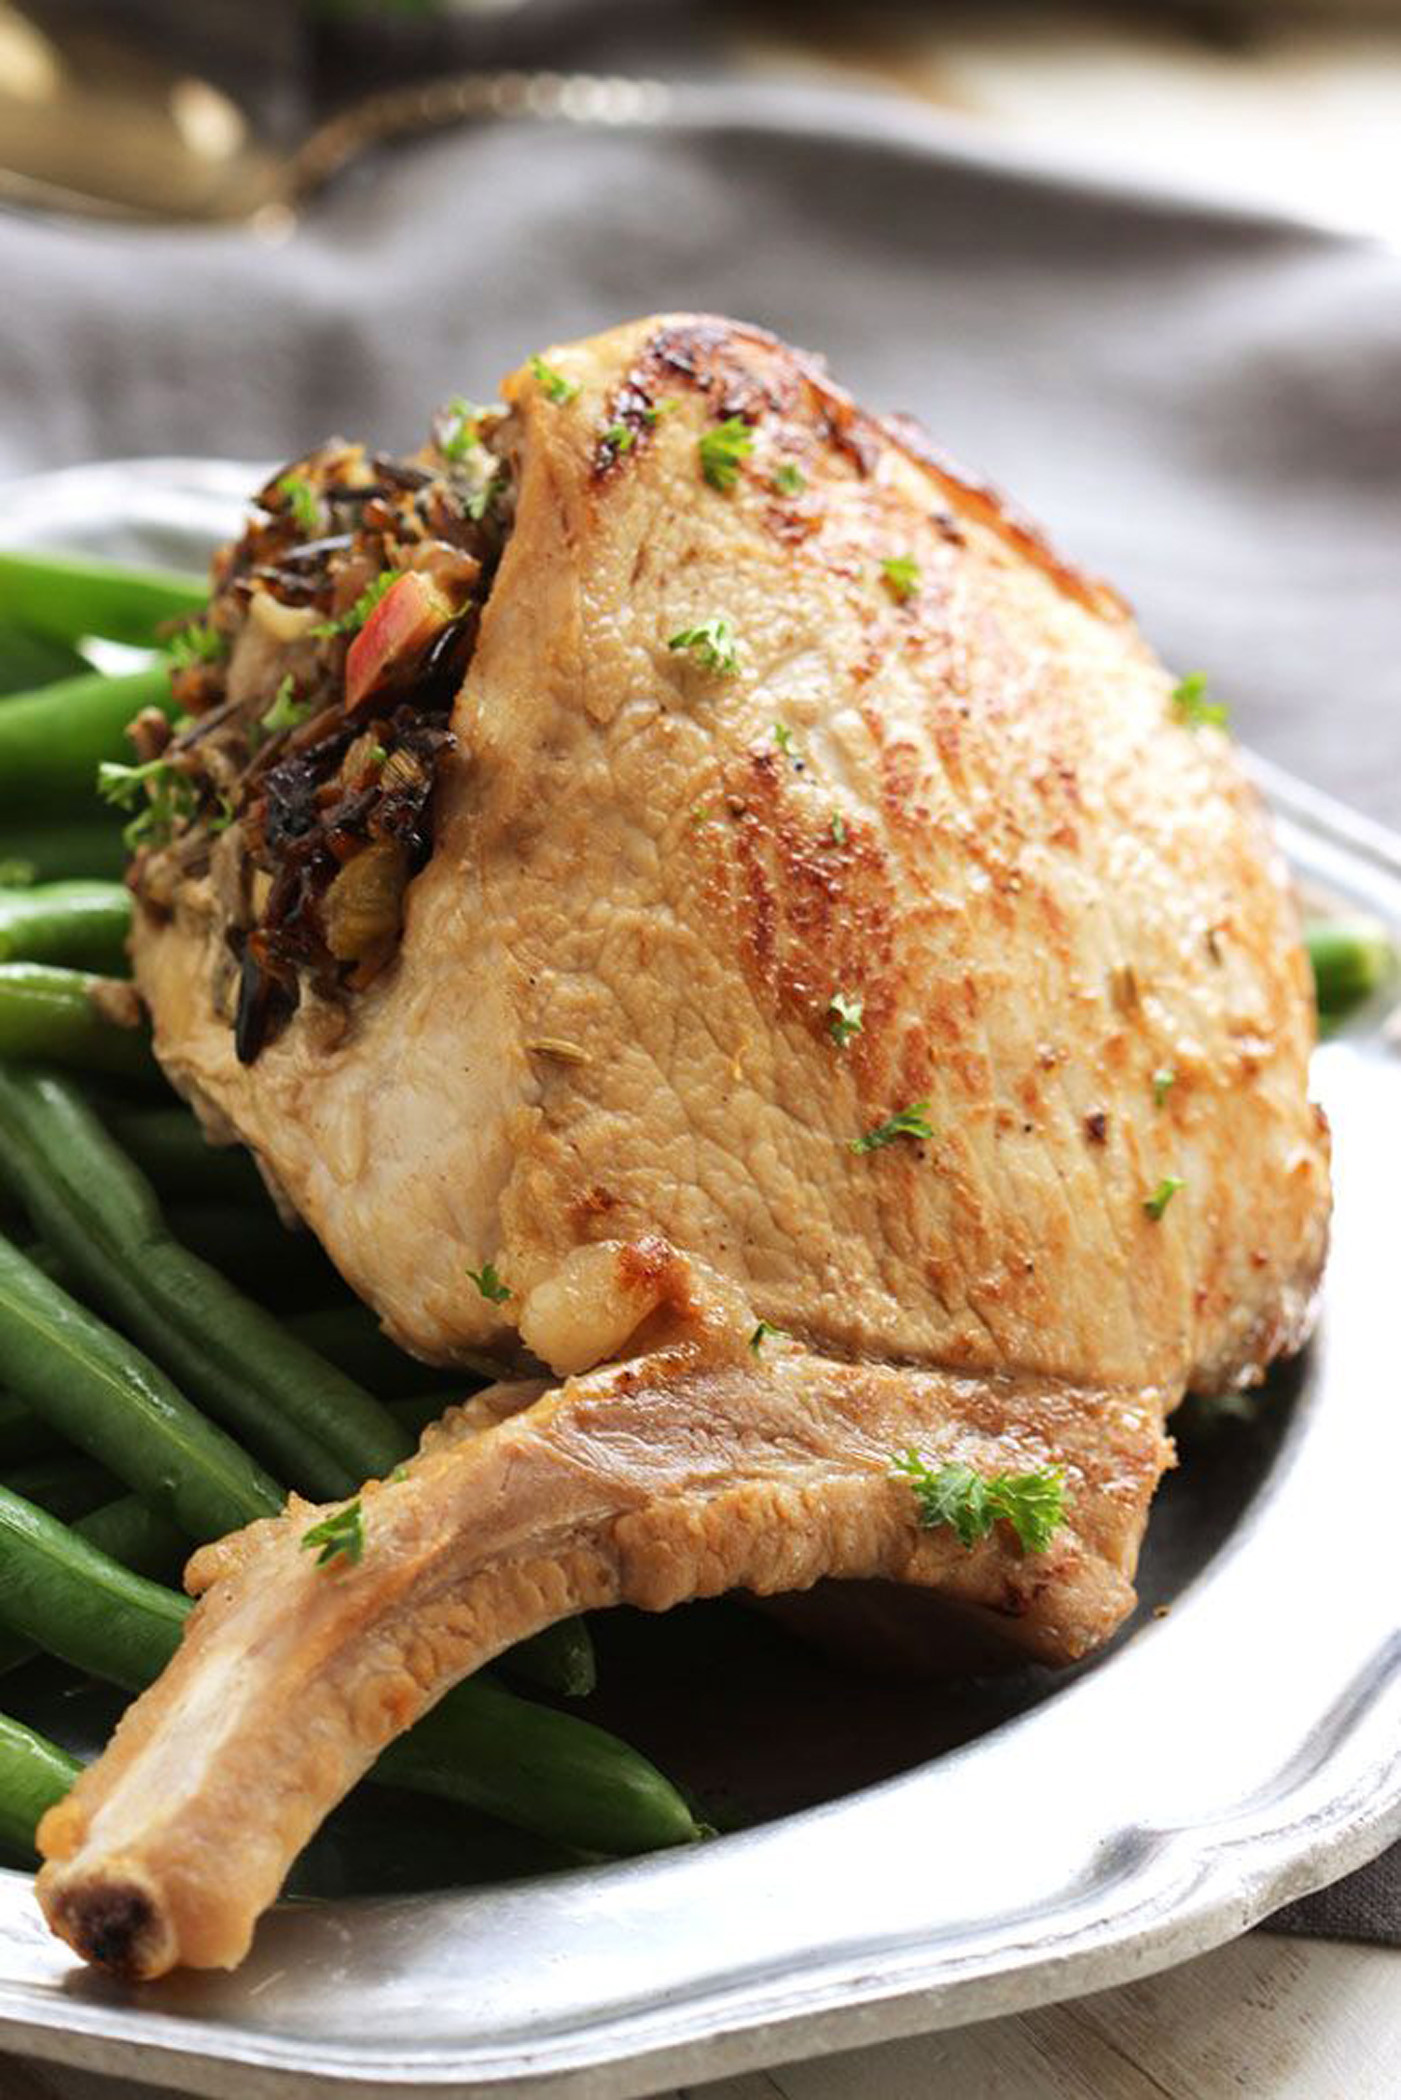 Recipes With Pork Chops
 Stuffed Pork Chops with Wild Rice Date and Apple Stuffing